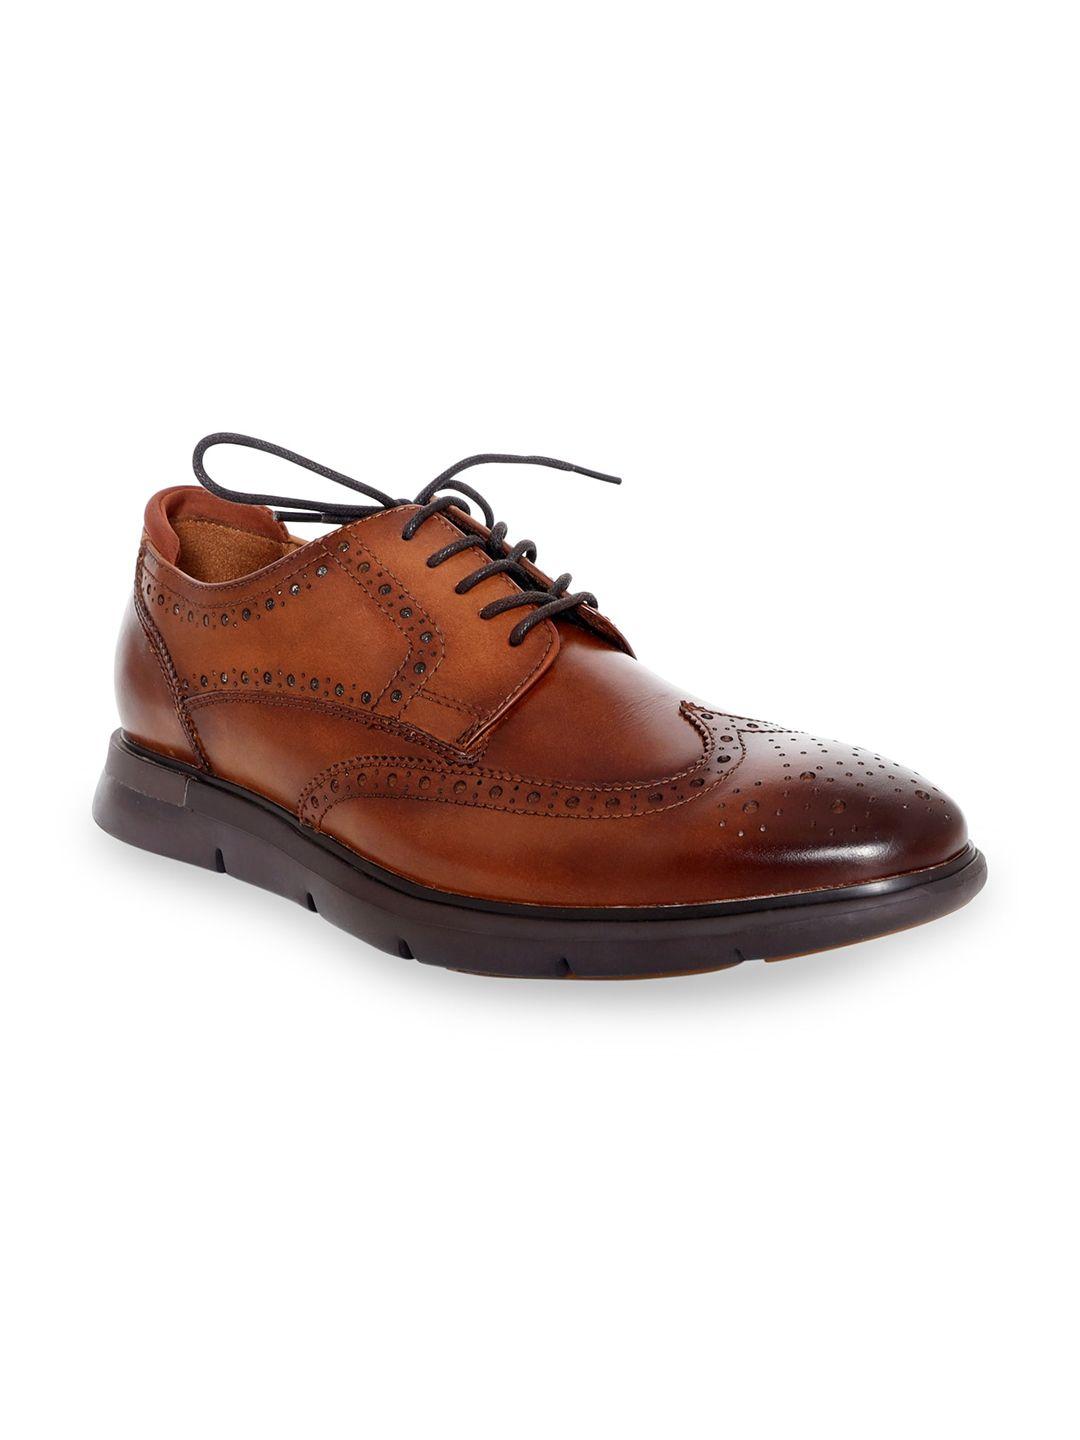 kenneth cole men tan brown textured leather formal brogues